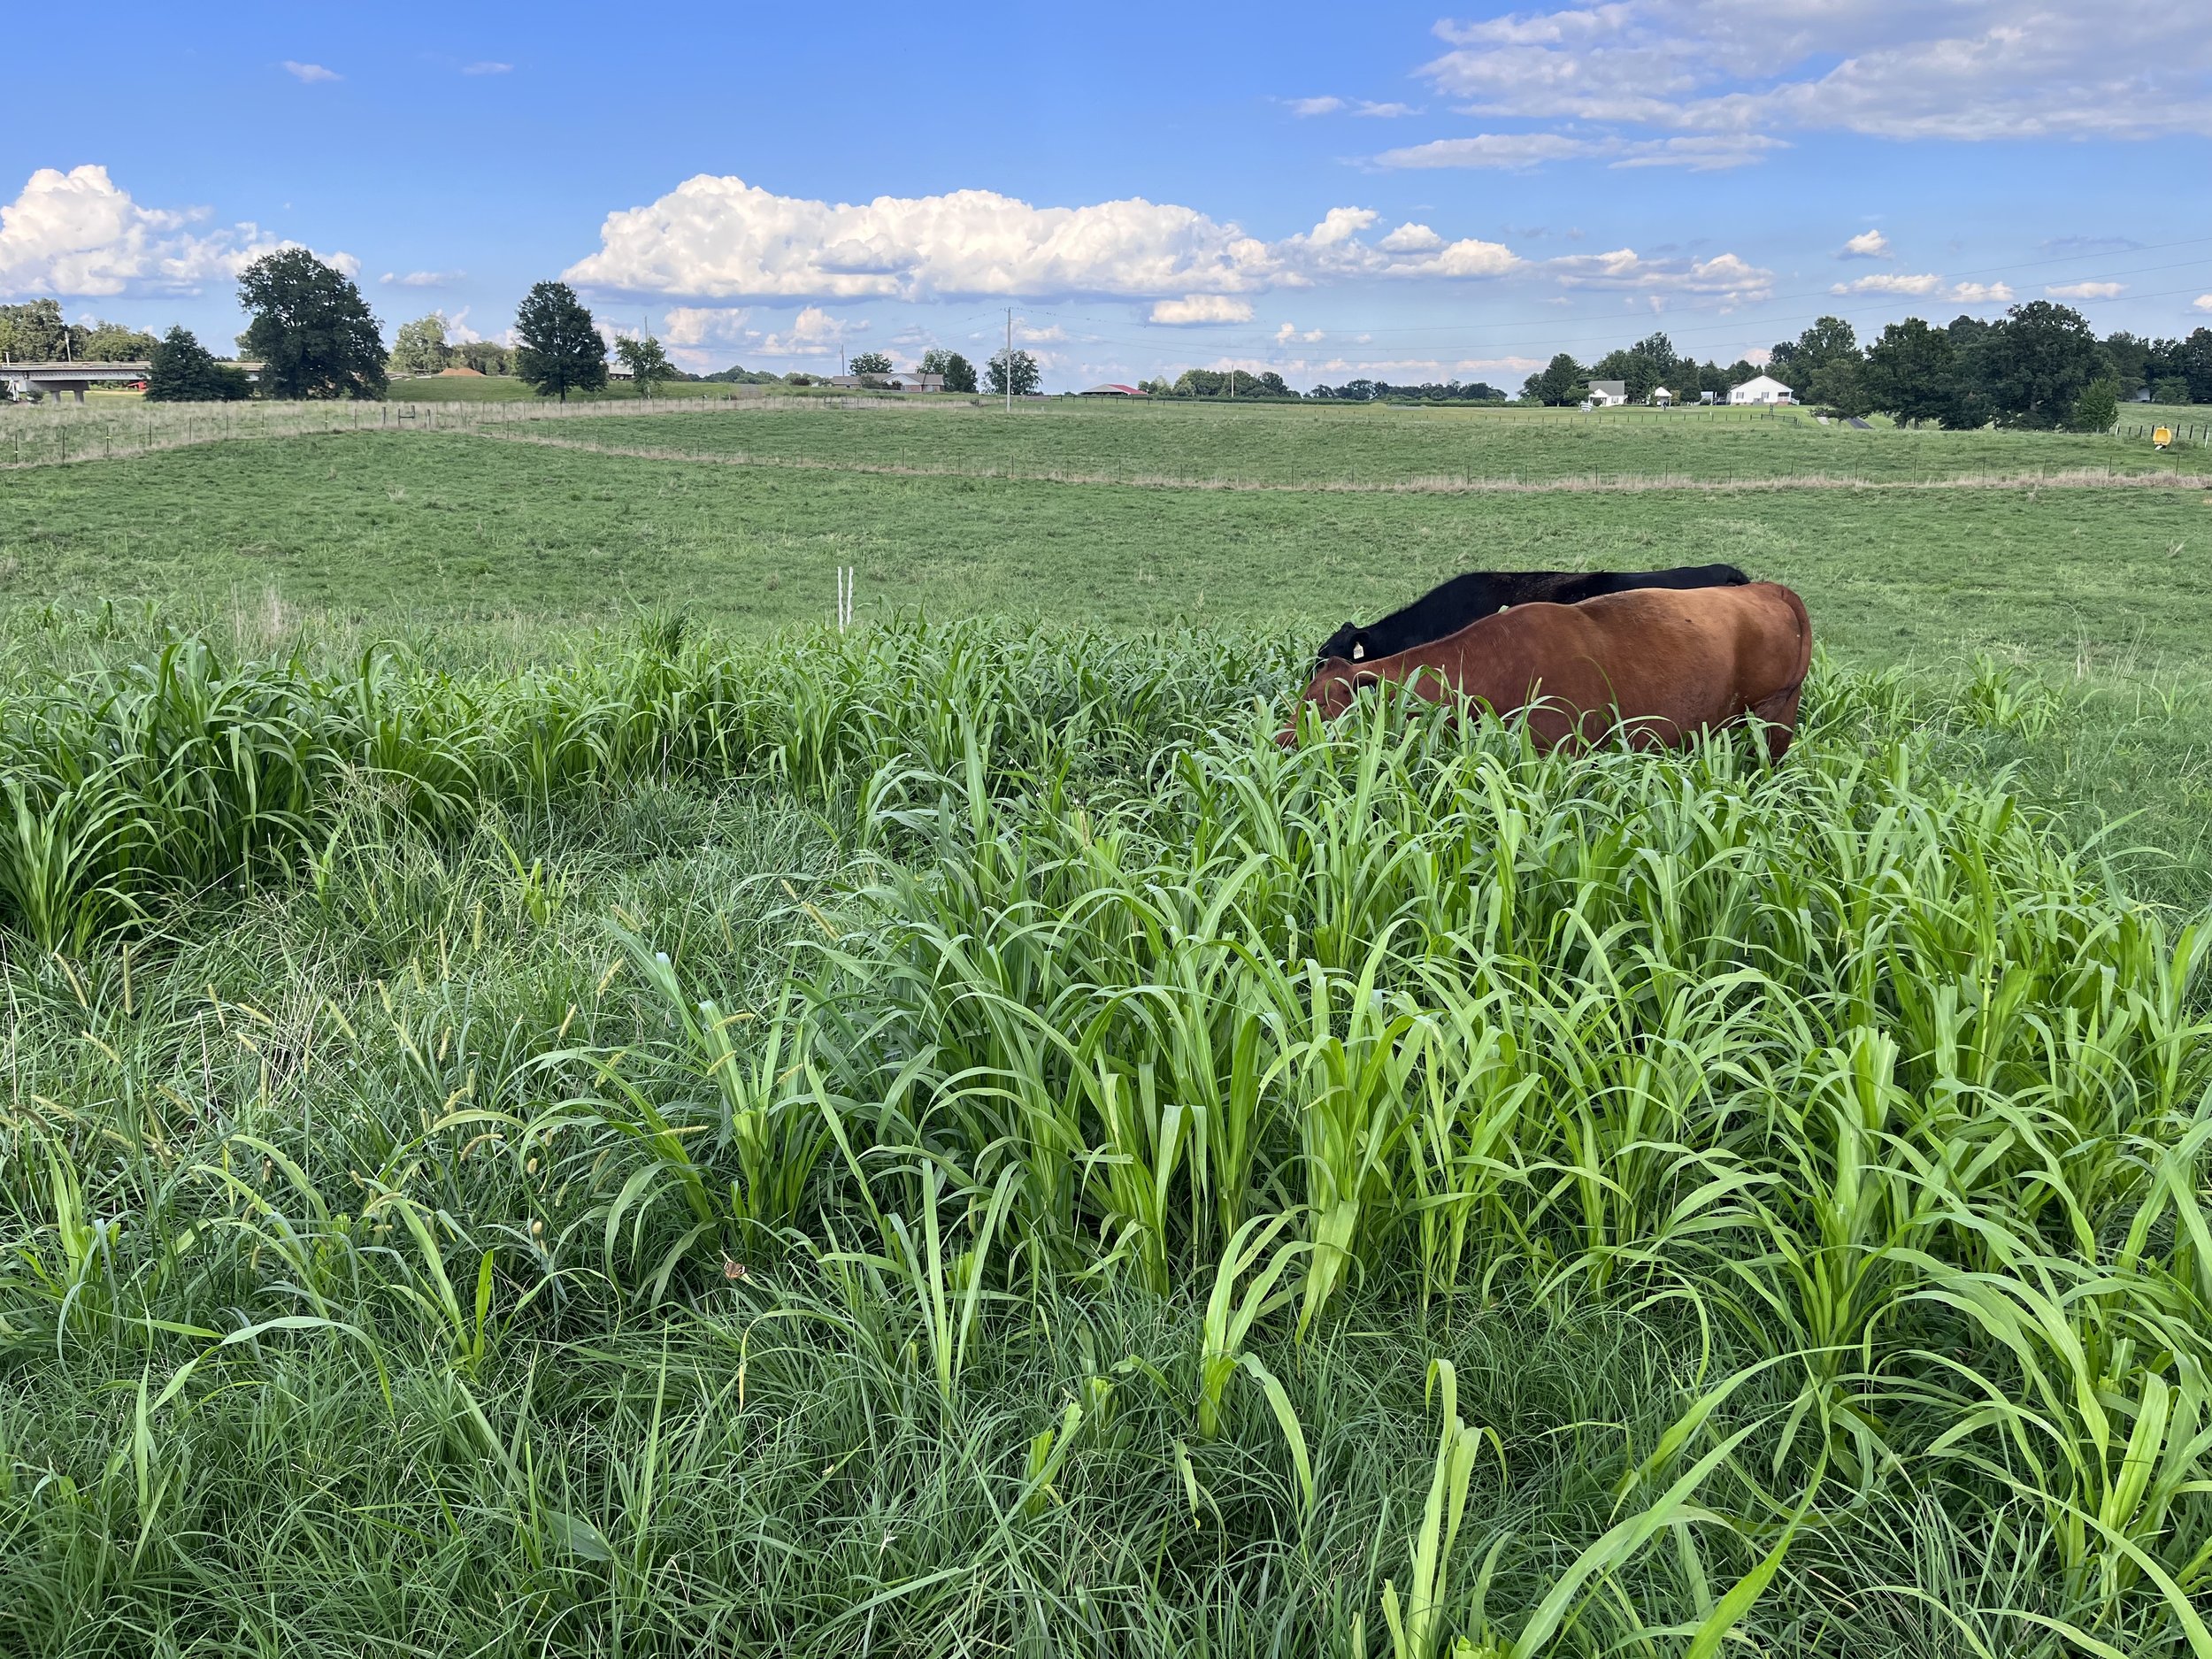 August 18 - Grazing a patch Pearl Millet